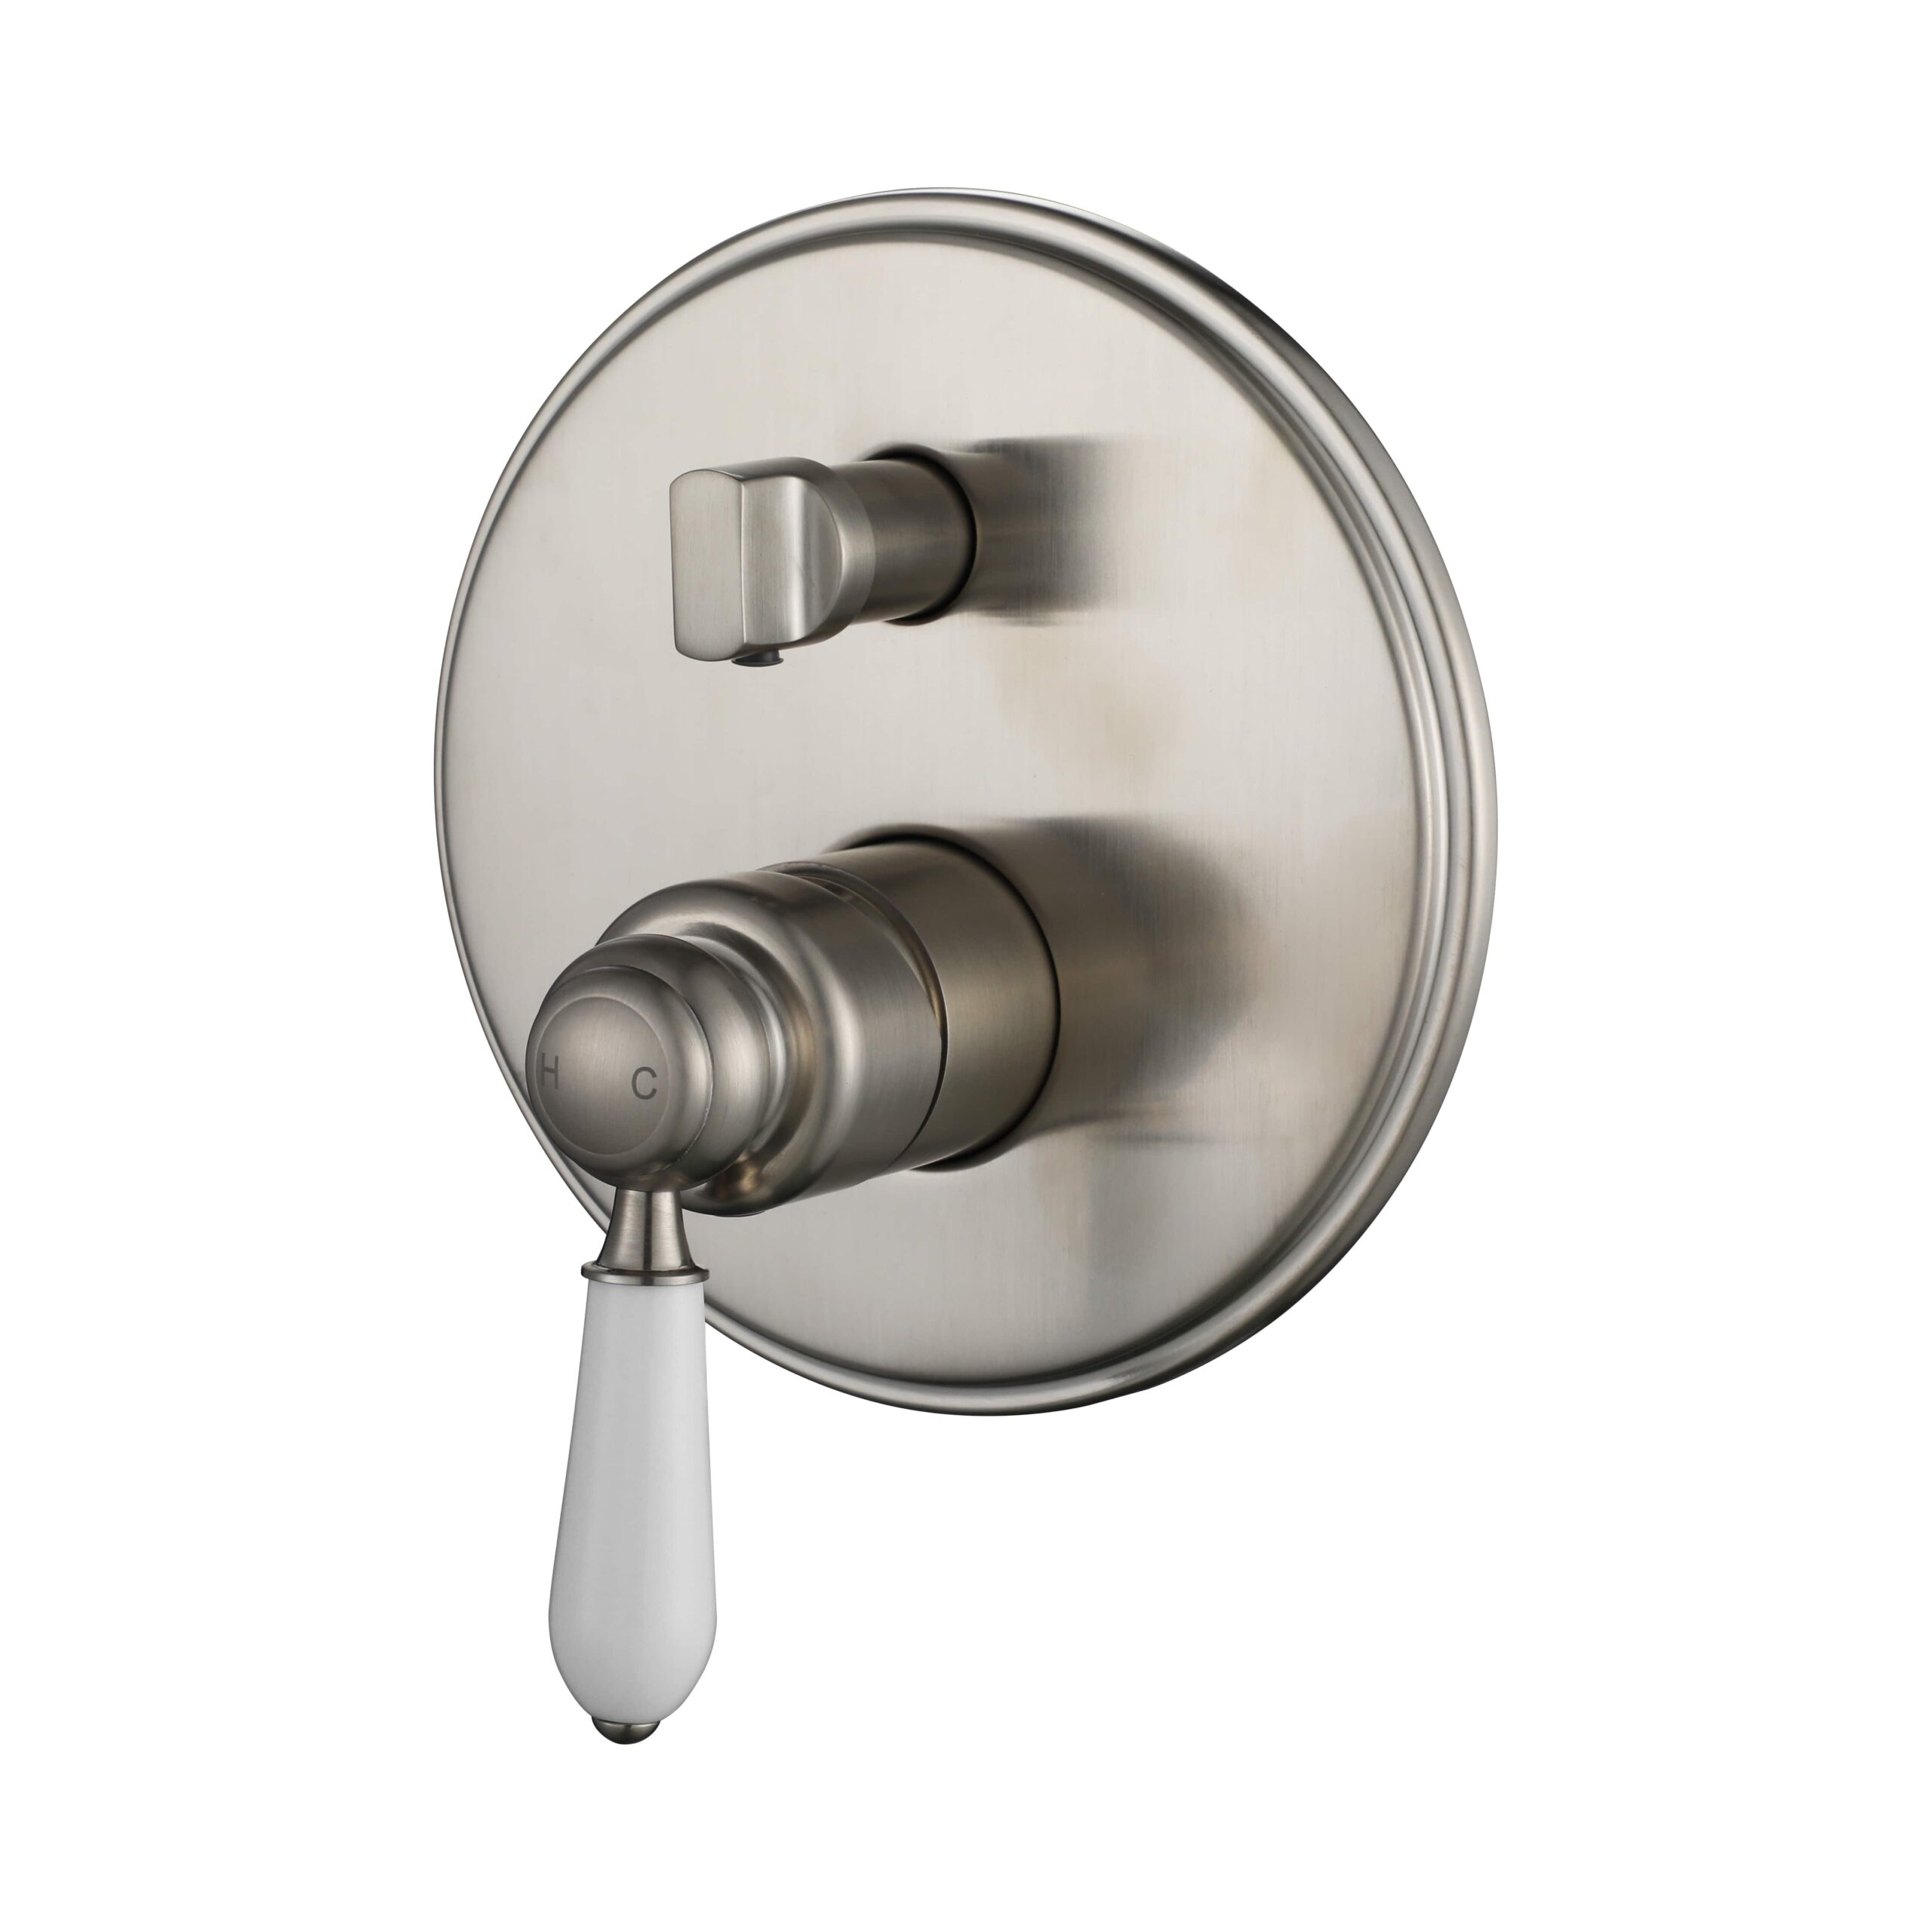 Bordeaux Brushed Nickel Wall Mixer w Diverter